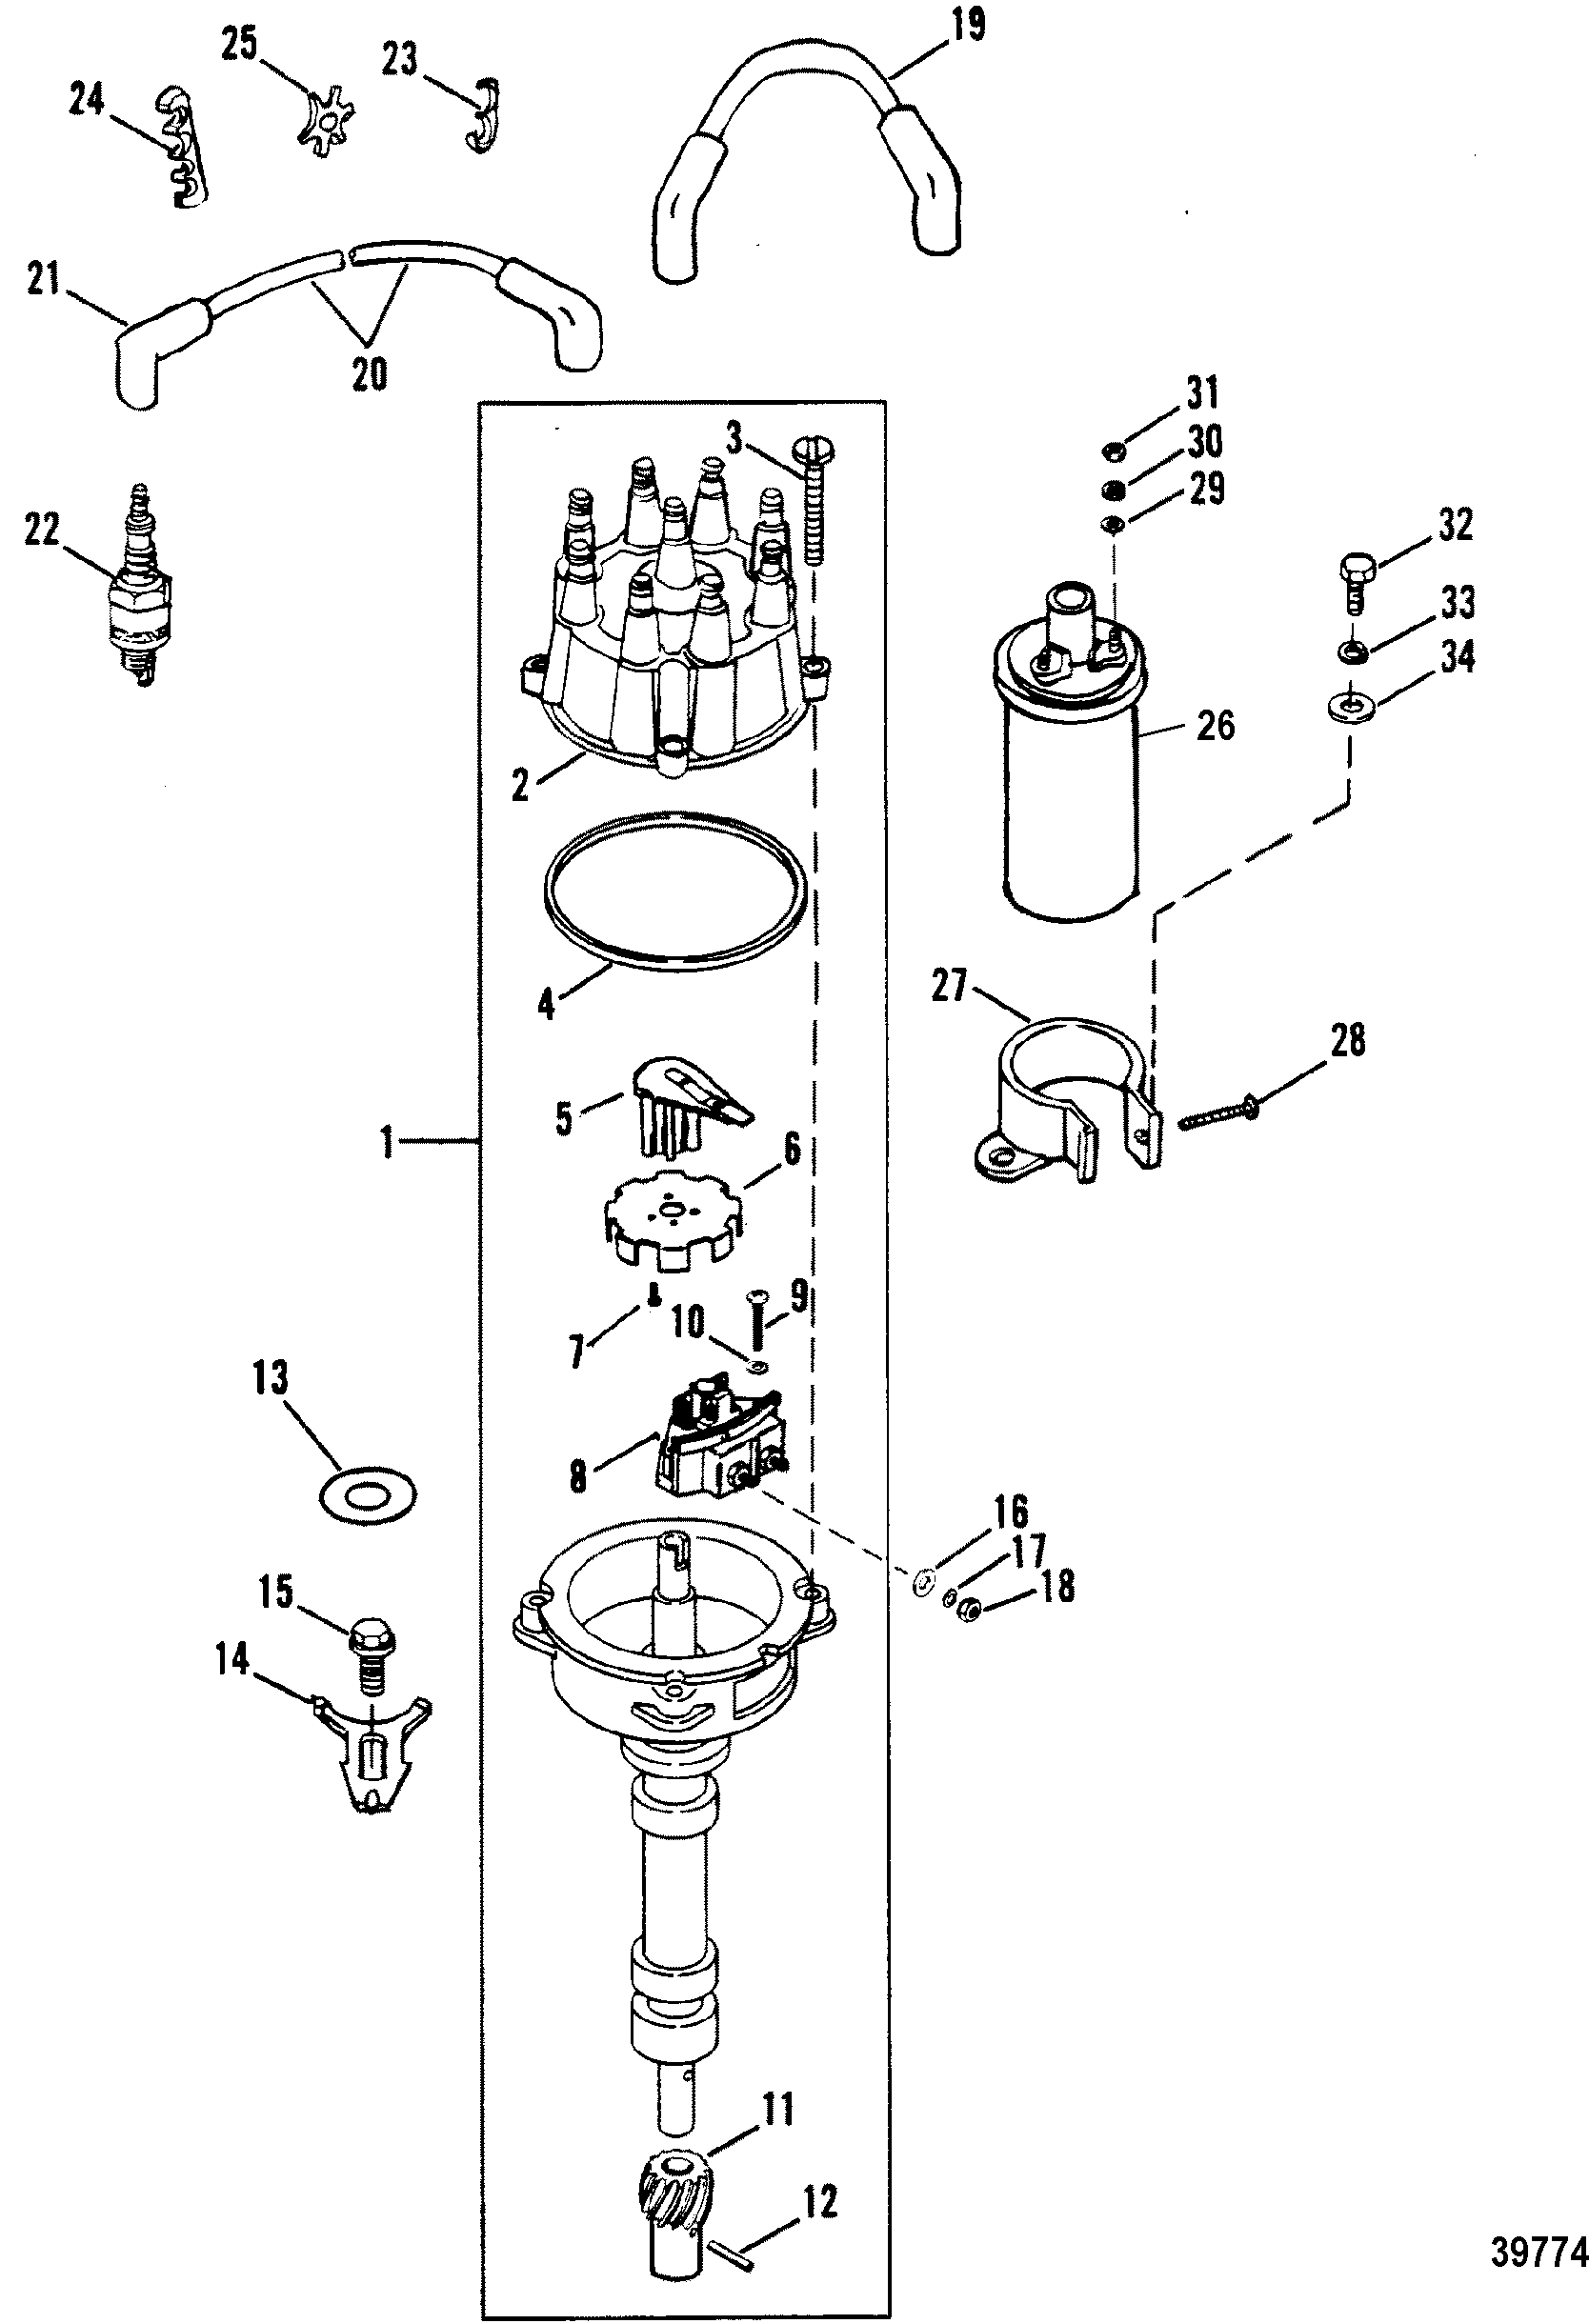 Distributor & Ignition Components